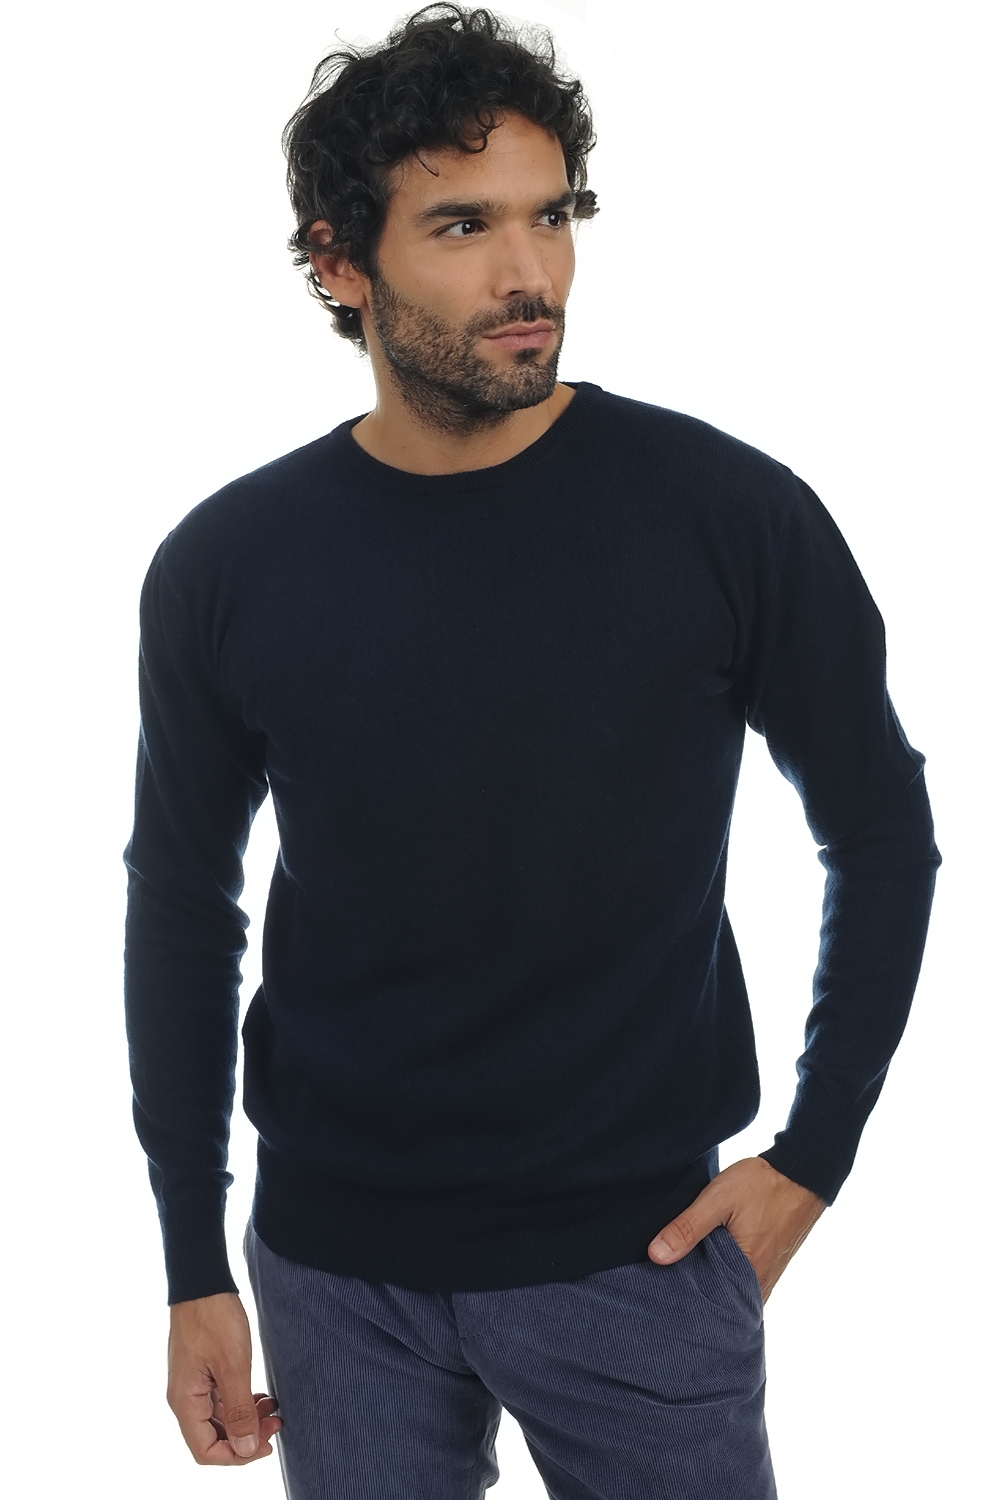 Cachemire pull homme col rond keaton marine fonce 4xl